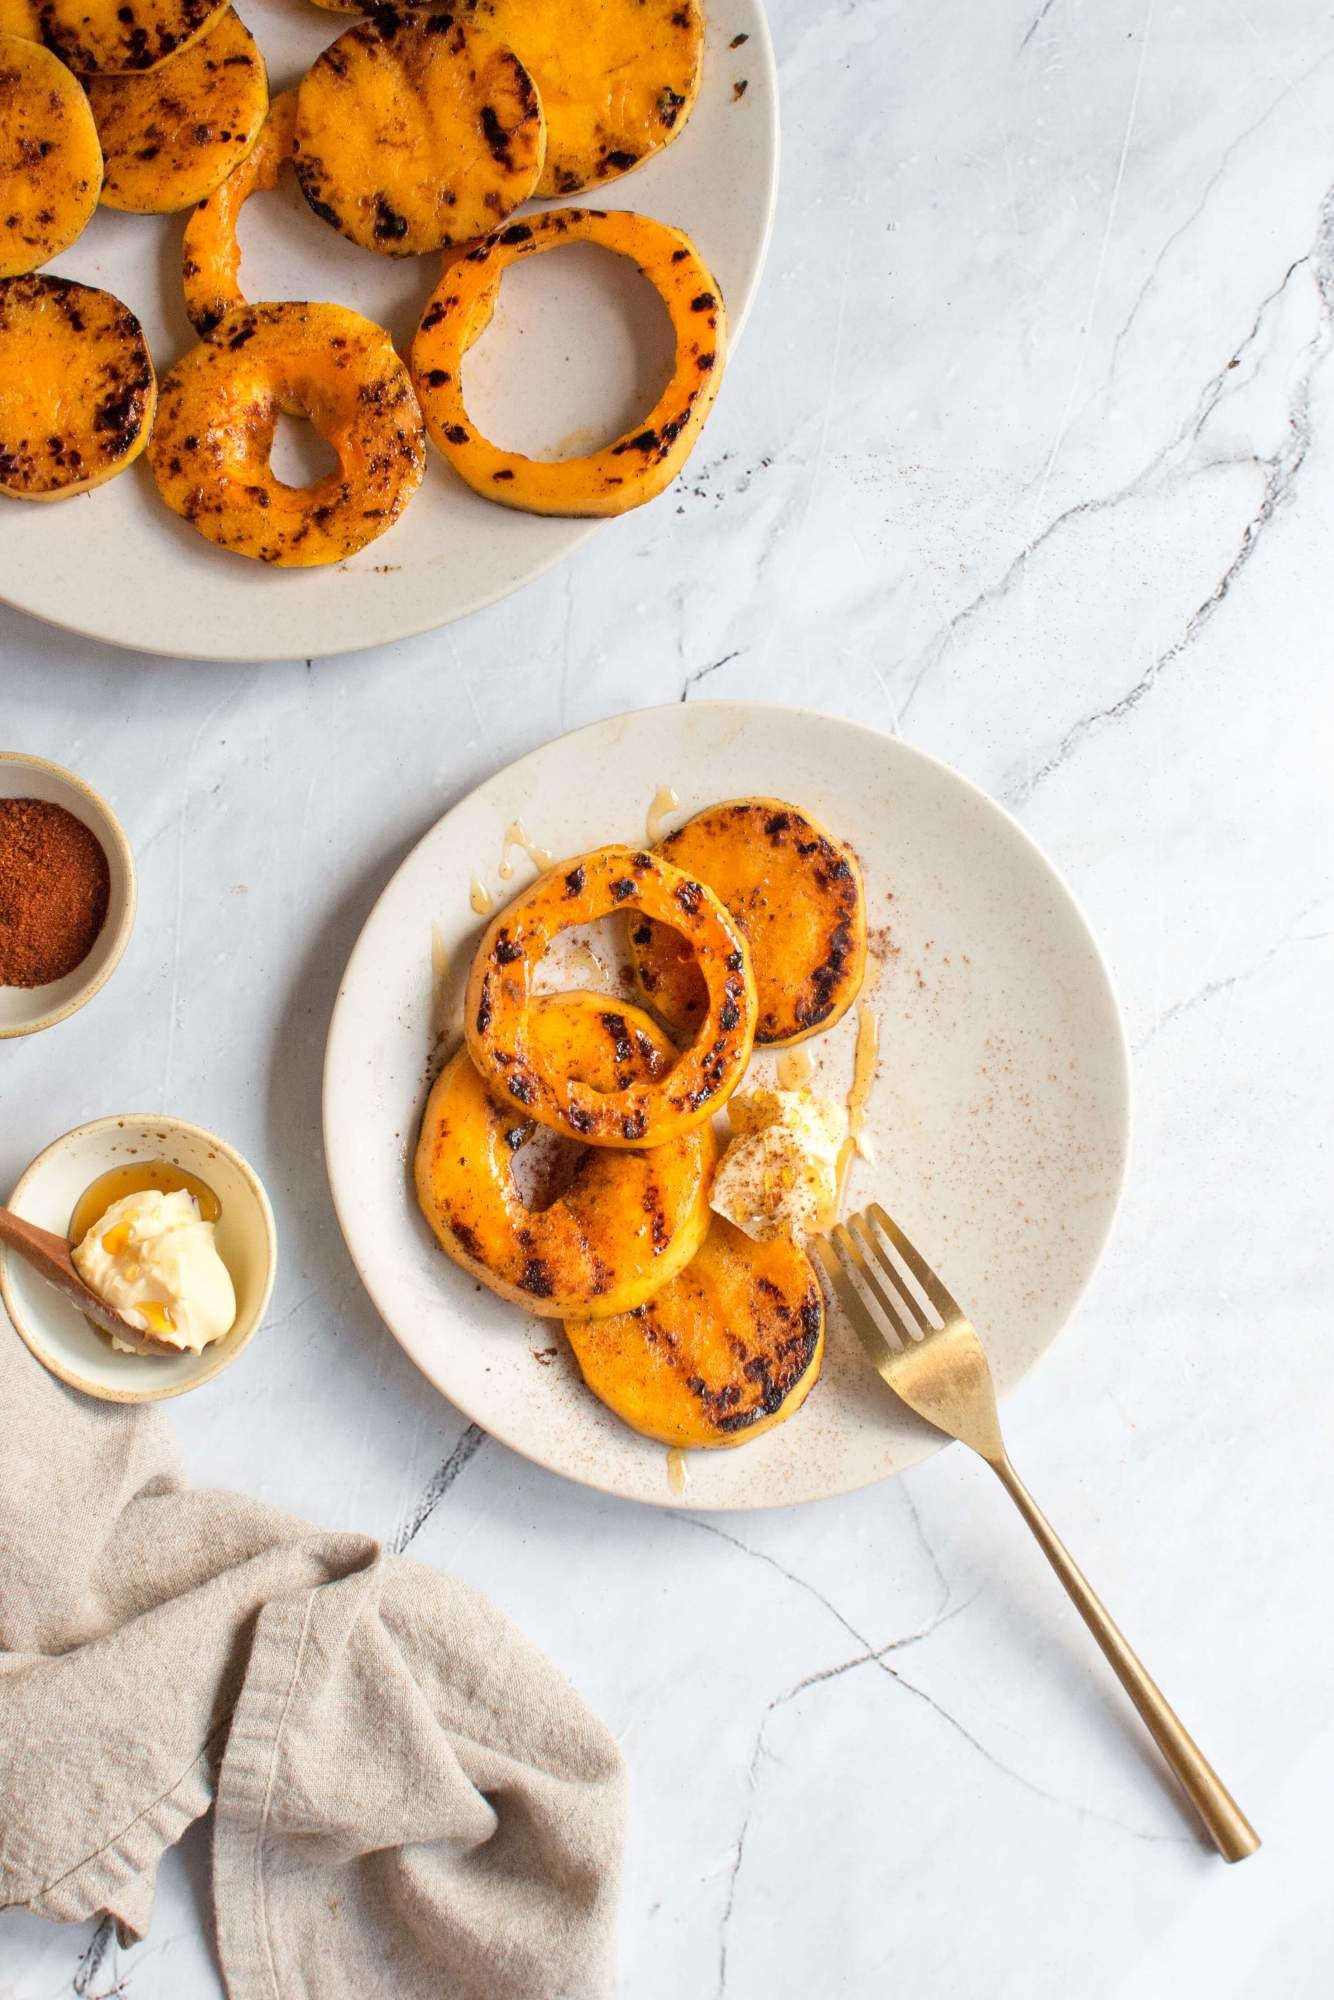 Butternut squash that has been grilled on a plate with a spice blend and butter on the side.